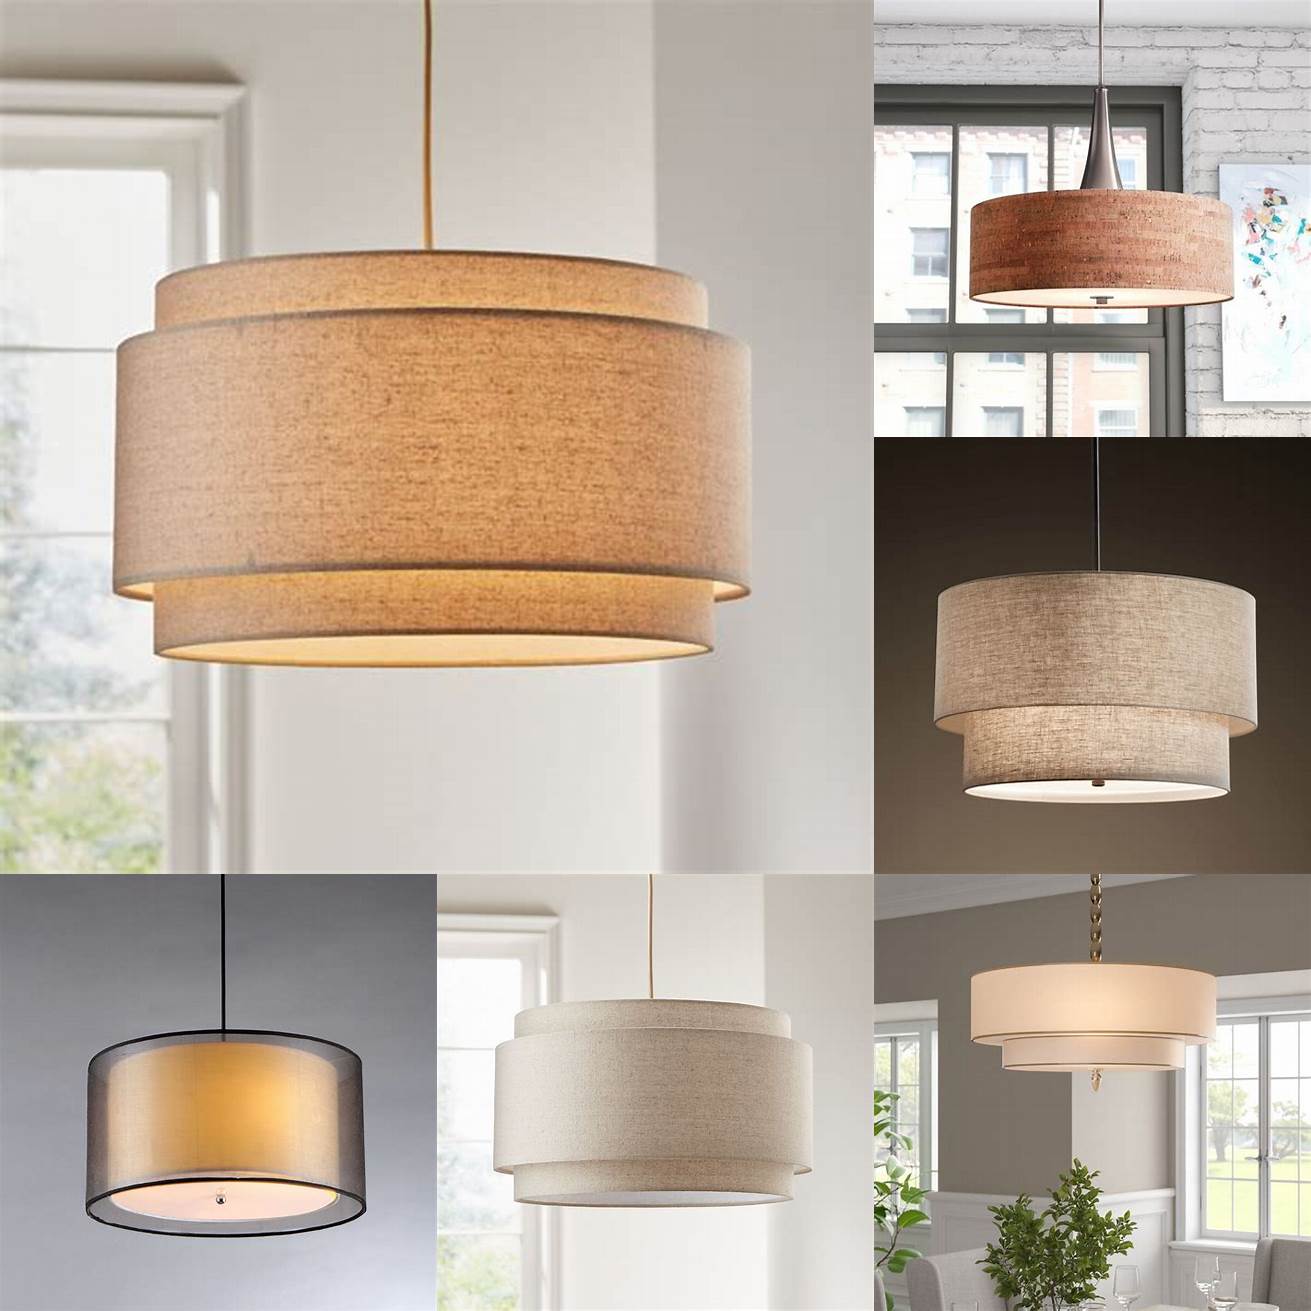 Choose a drum pendant light with a patterned shade for a unique look